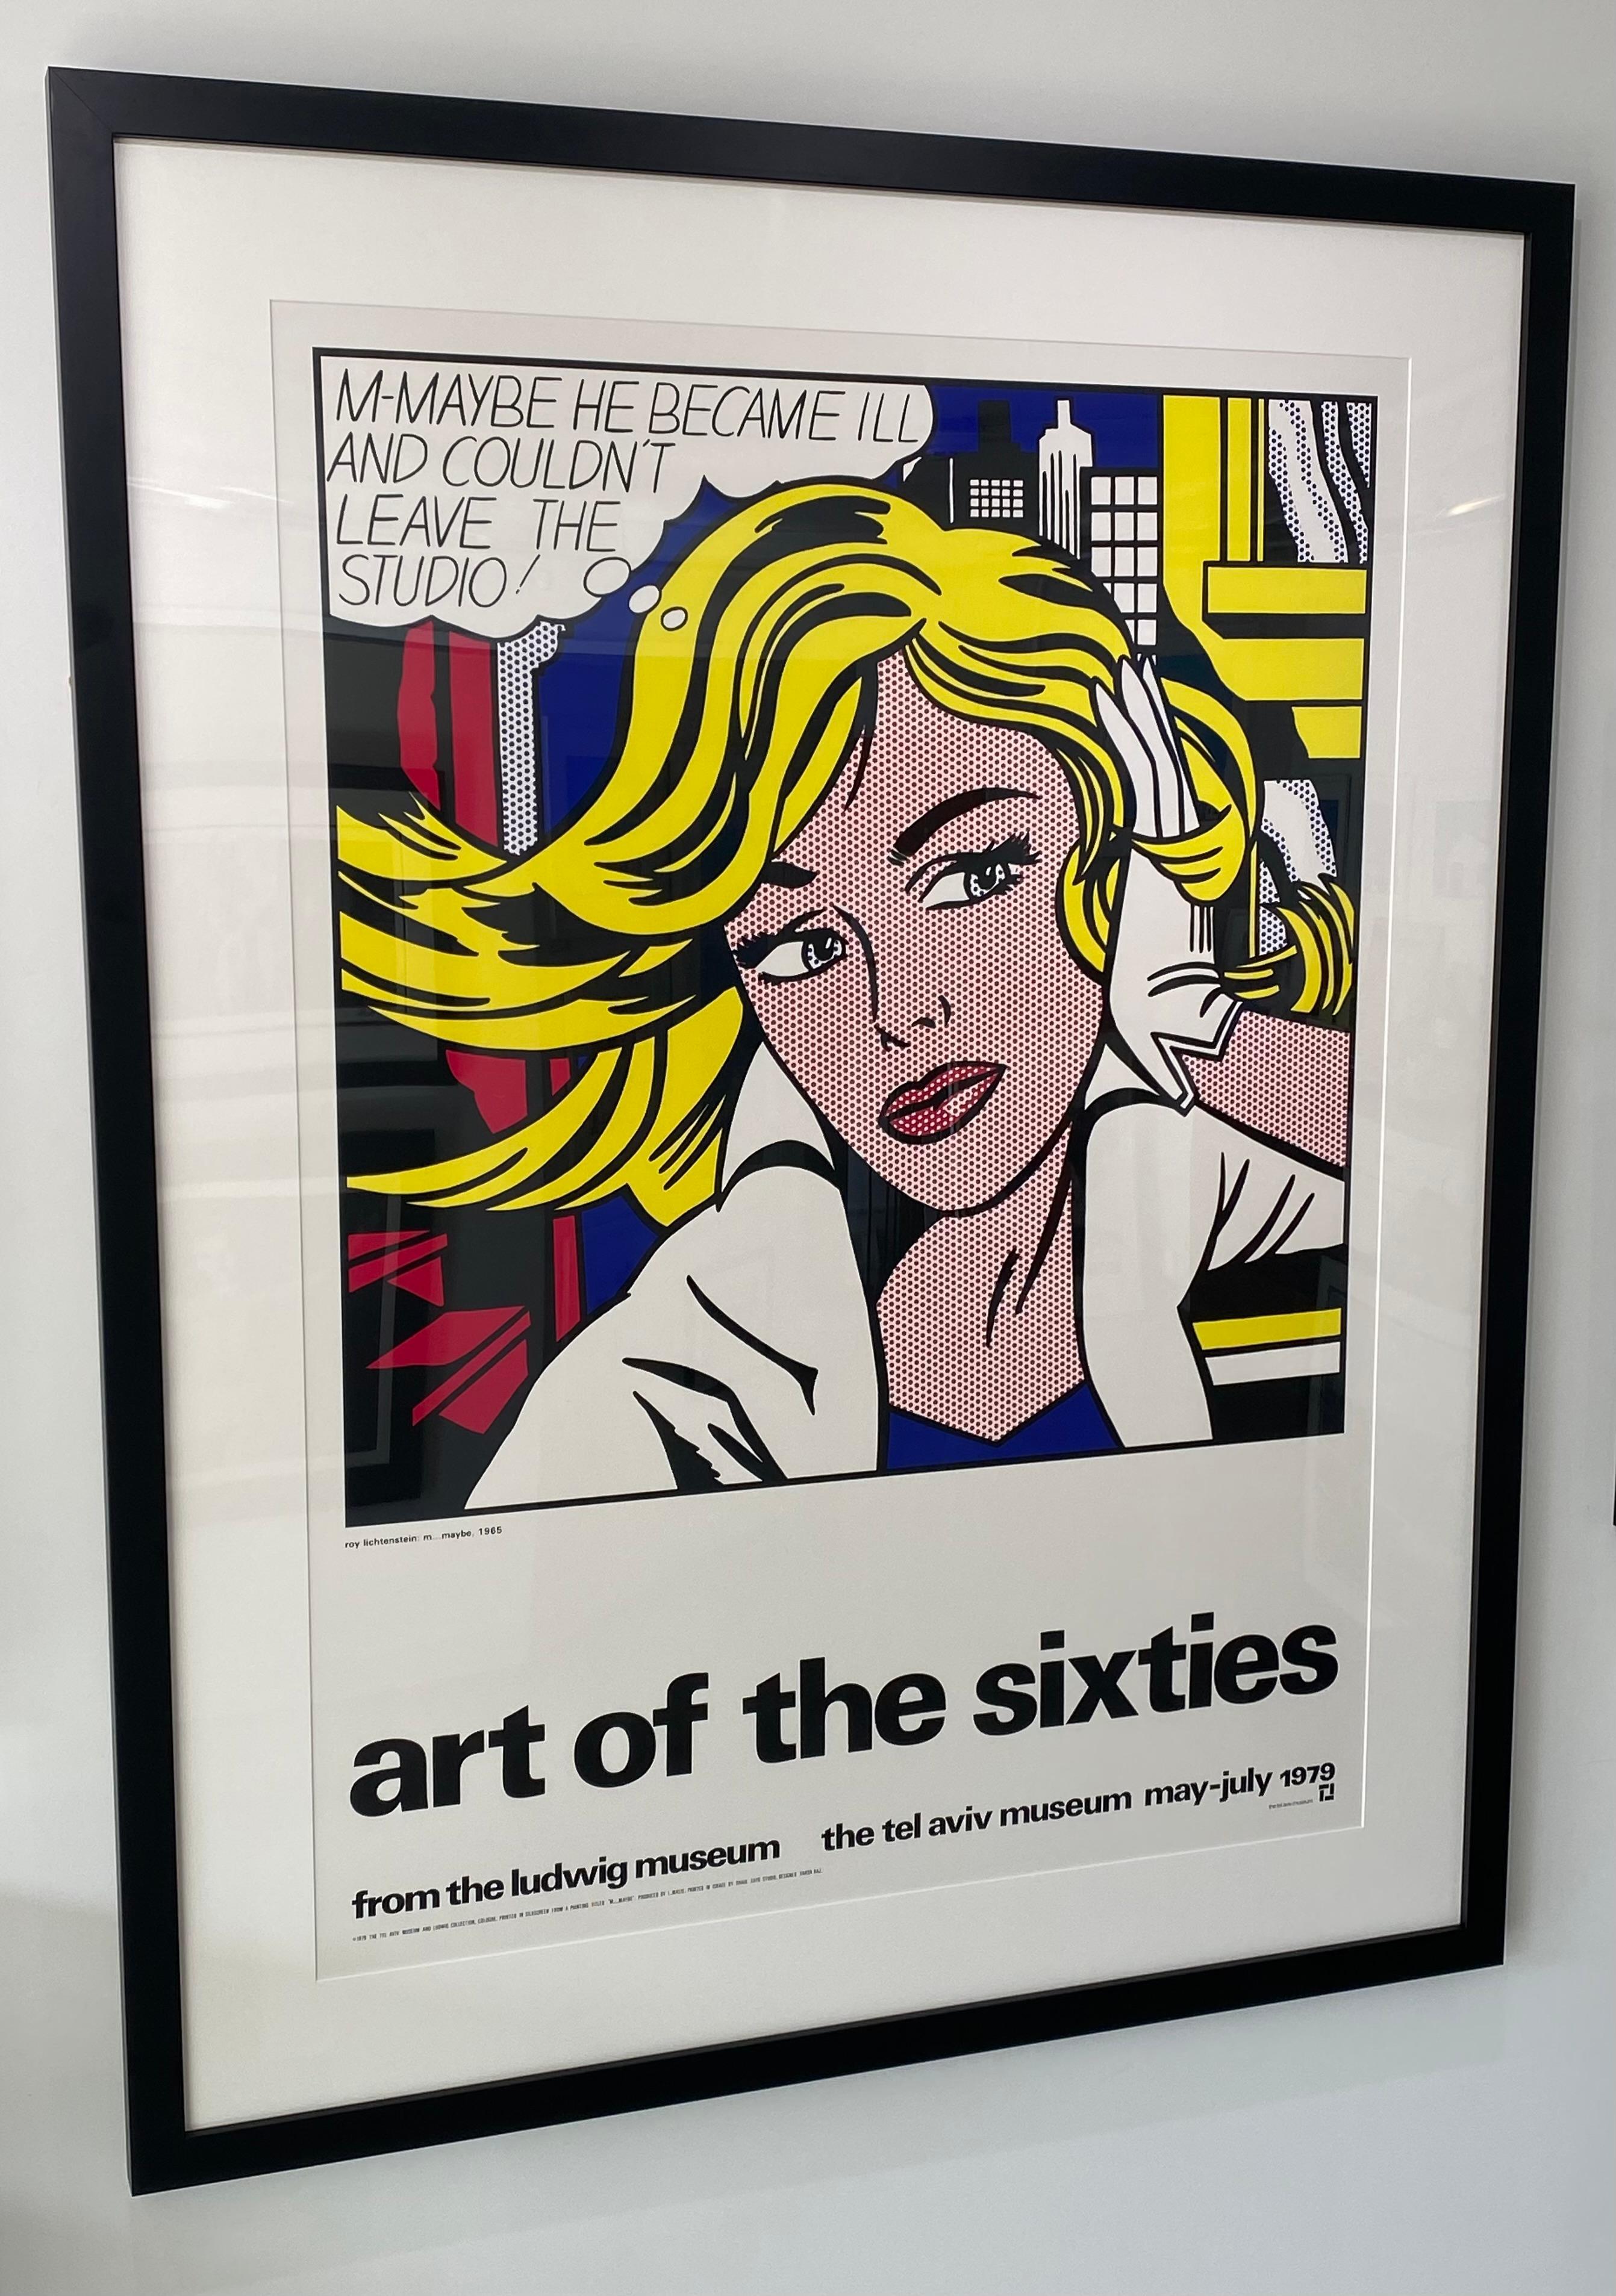 Roy Lichtenstein Art of the Sixties screen print poster printed at the time of the exhibition in 1979 for the exhibition at the Tel Aviv Museum in Israel. Please note that the frame dimensions are 59.5